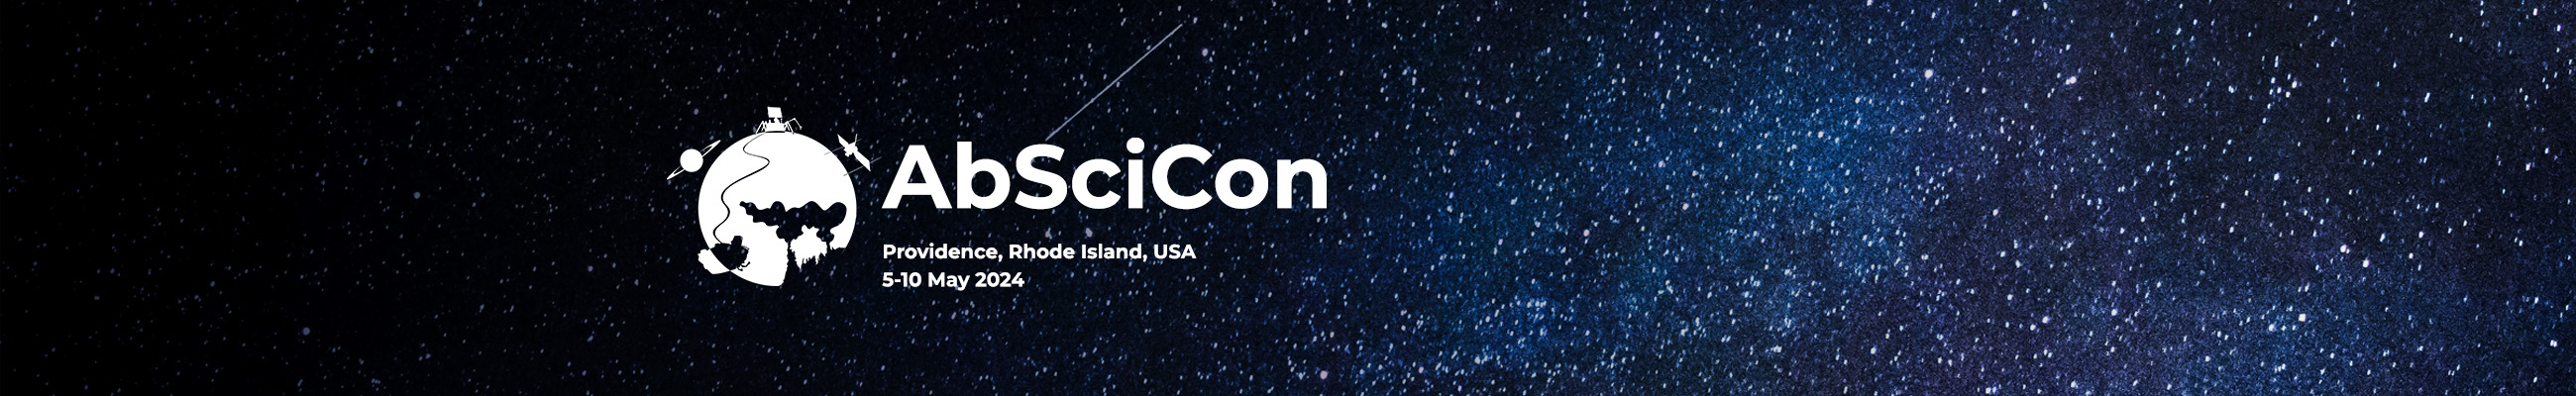 Abscicon24 banner image